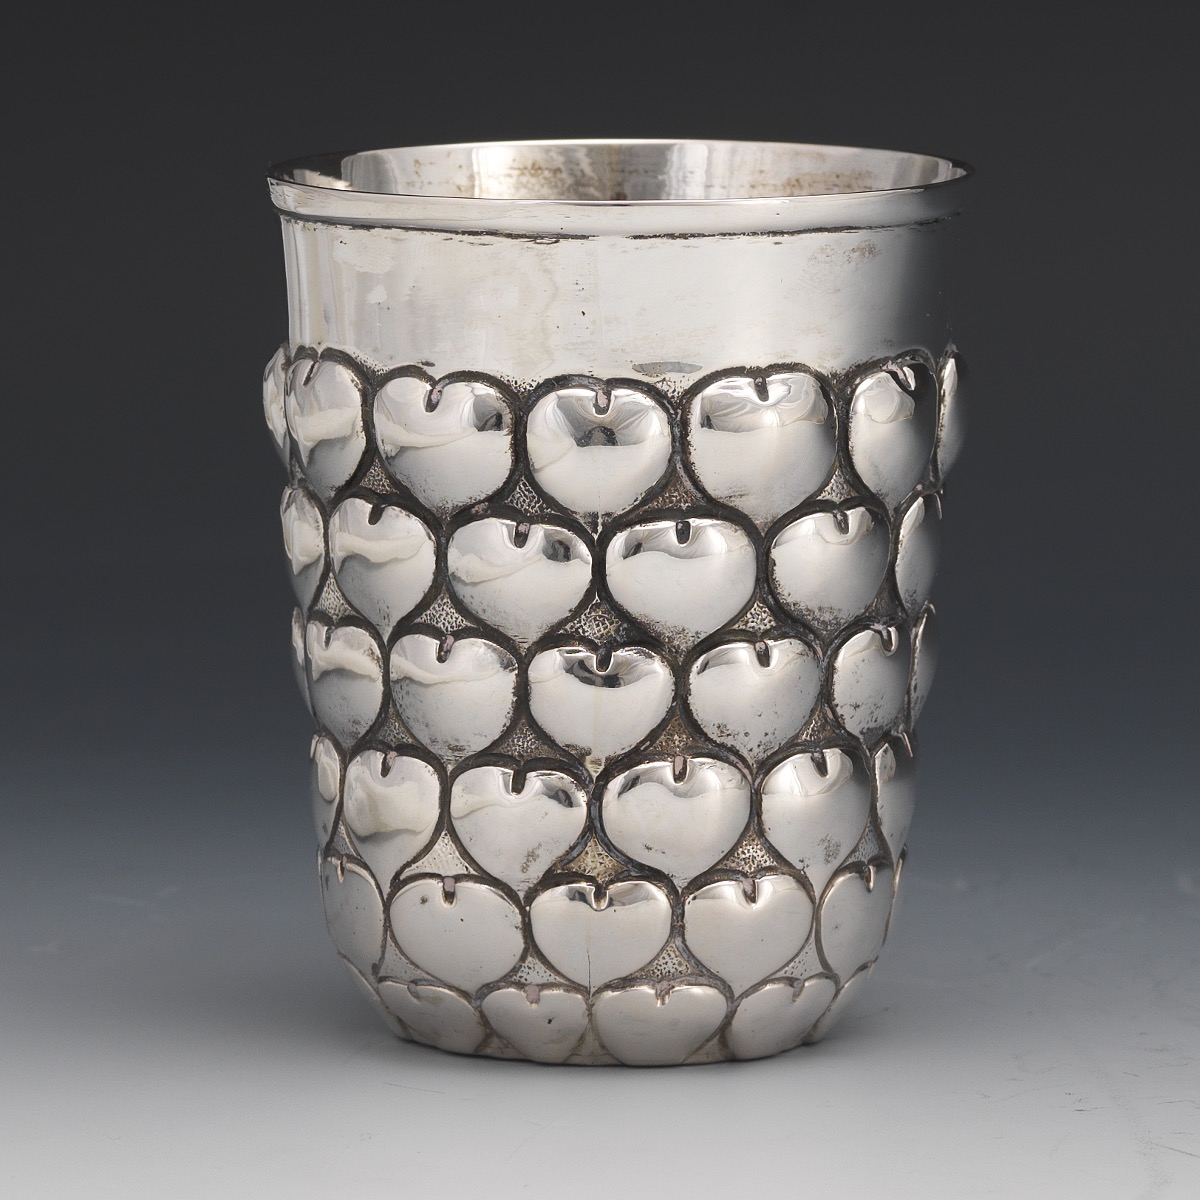 German Silver Cup in Style of Medieval 14th Century, by Ludwig Nereshelmer, Hanau - Image 4 of 7